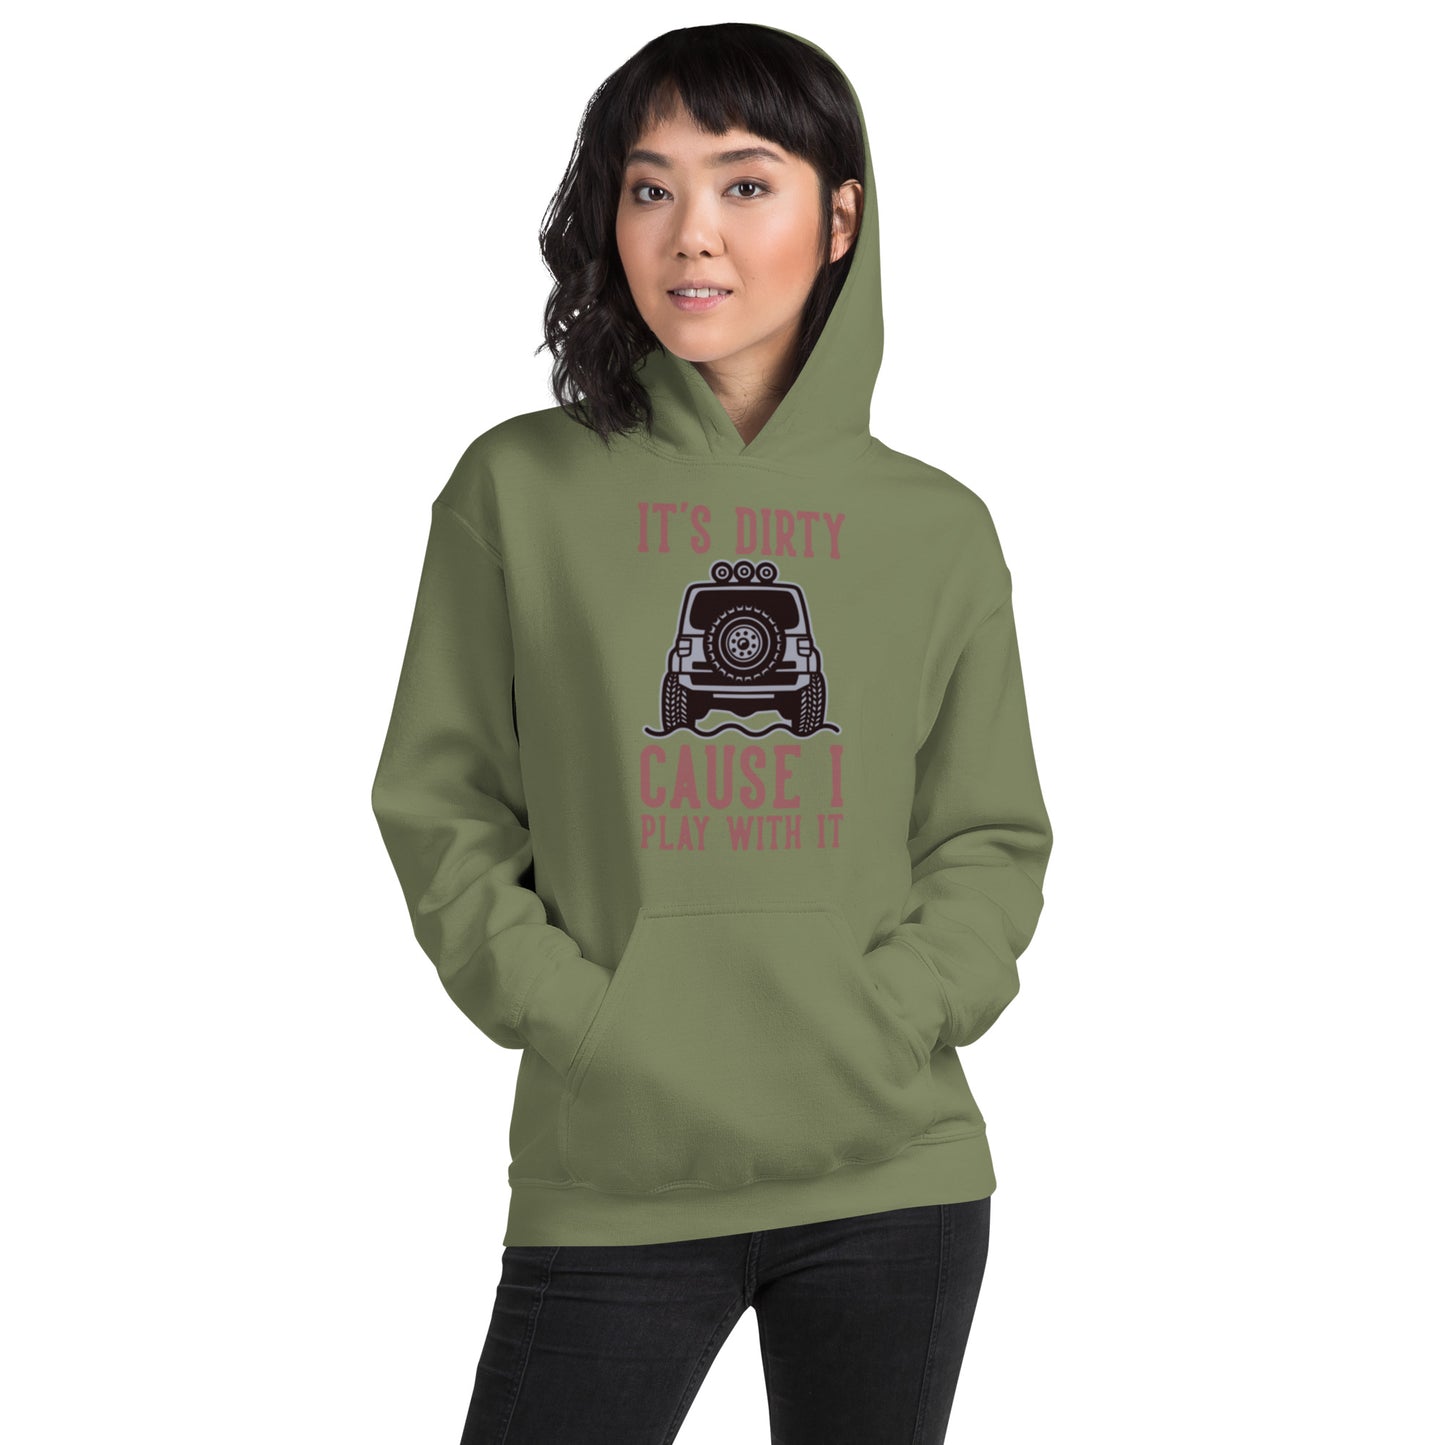 It's Dirty, Cause I Play With It Unisex Hoodie